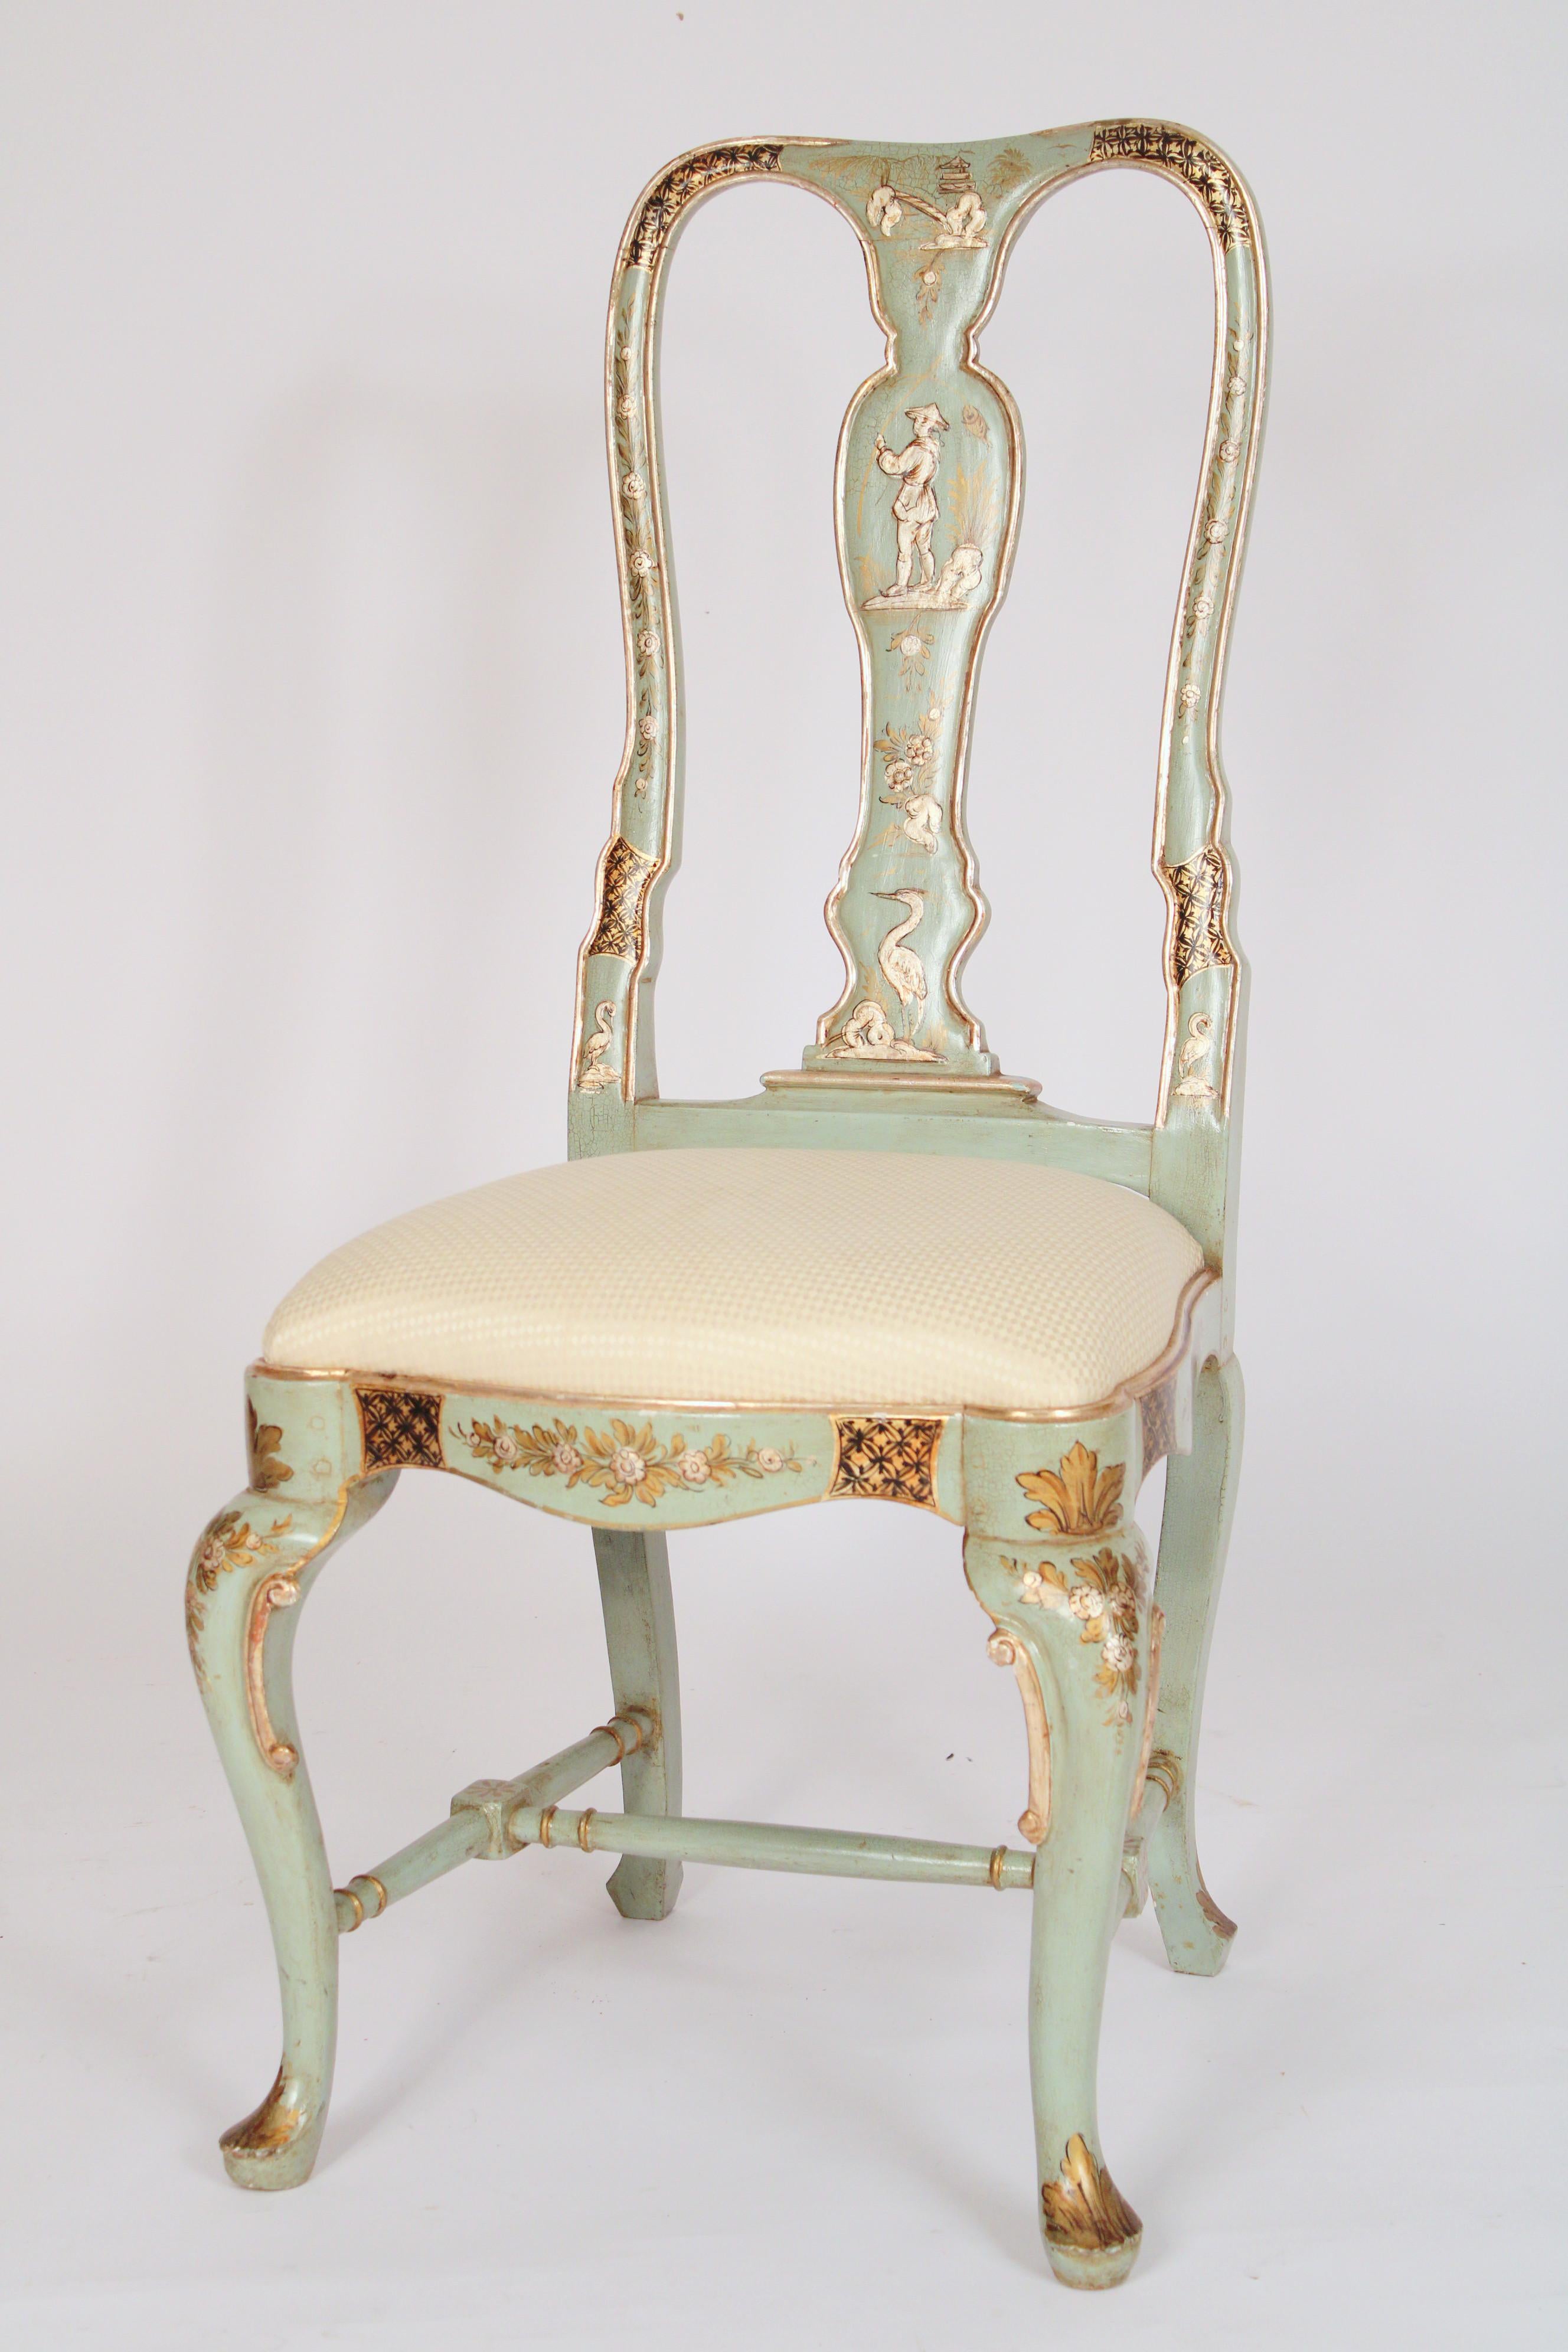 Set of 4 Queen Anne Style Chinoiserie Decorated Side Chairs In Good Condition For Sale In Laguna Beach, CA